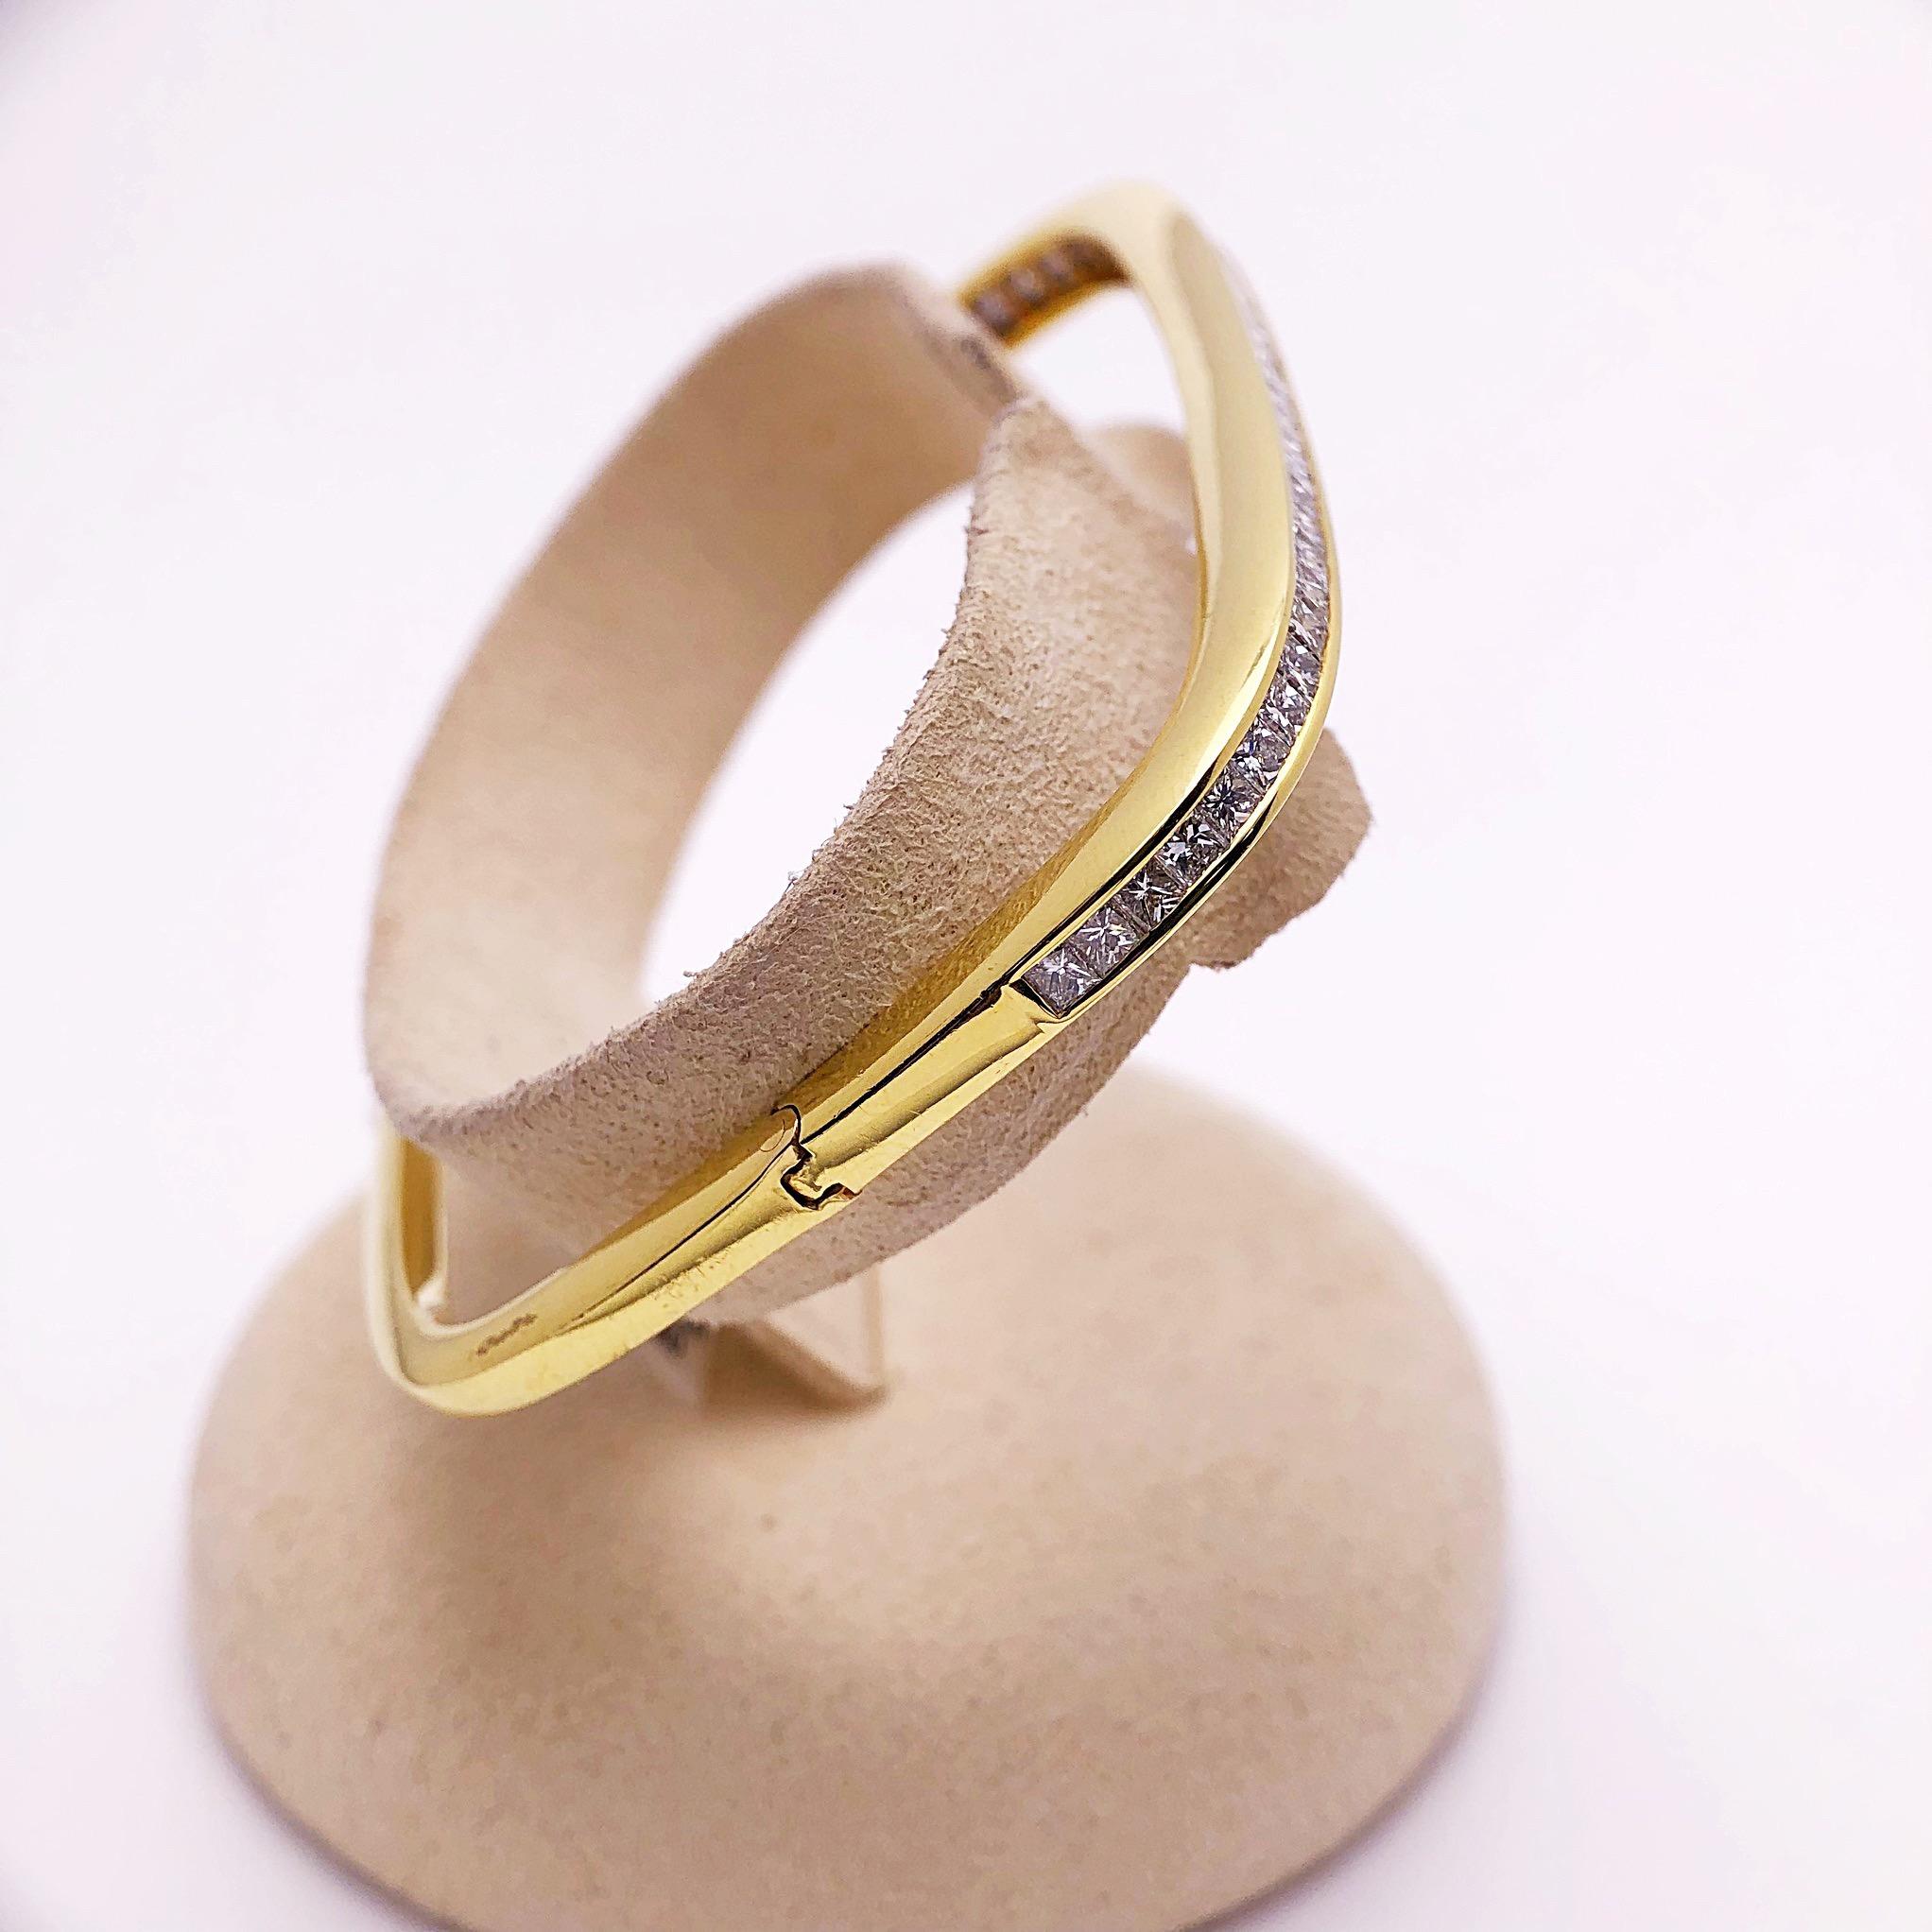 Featuring a modern 18 Kt Yellow Gold square bangle bracelet, this bracelet has been invisibly set with 2.96 carats of princess cut diamonds. The single row of diamonds create a beautiful sparkle across the wrist. The inside diameter is 2.25